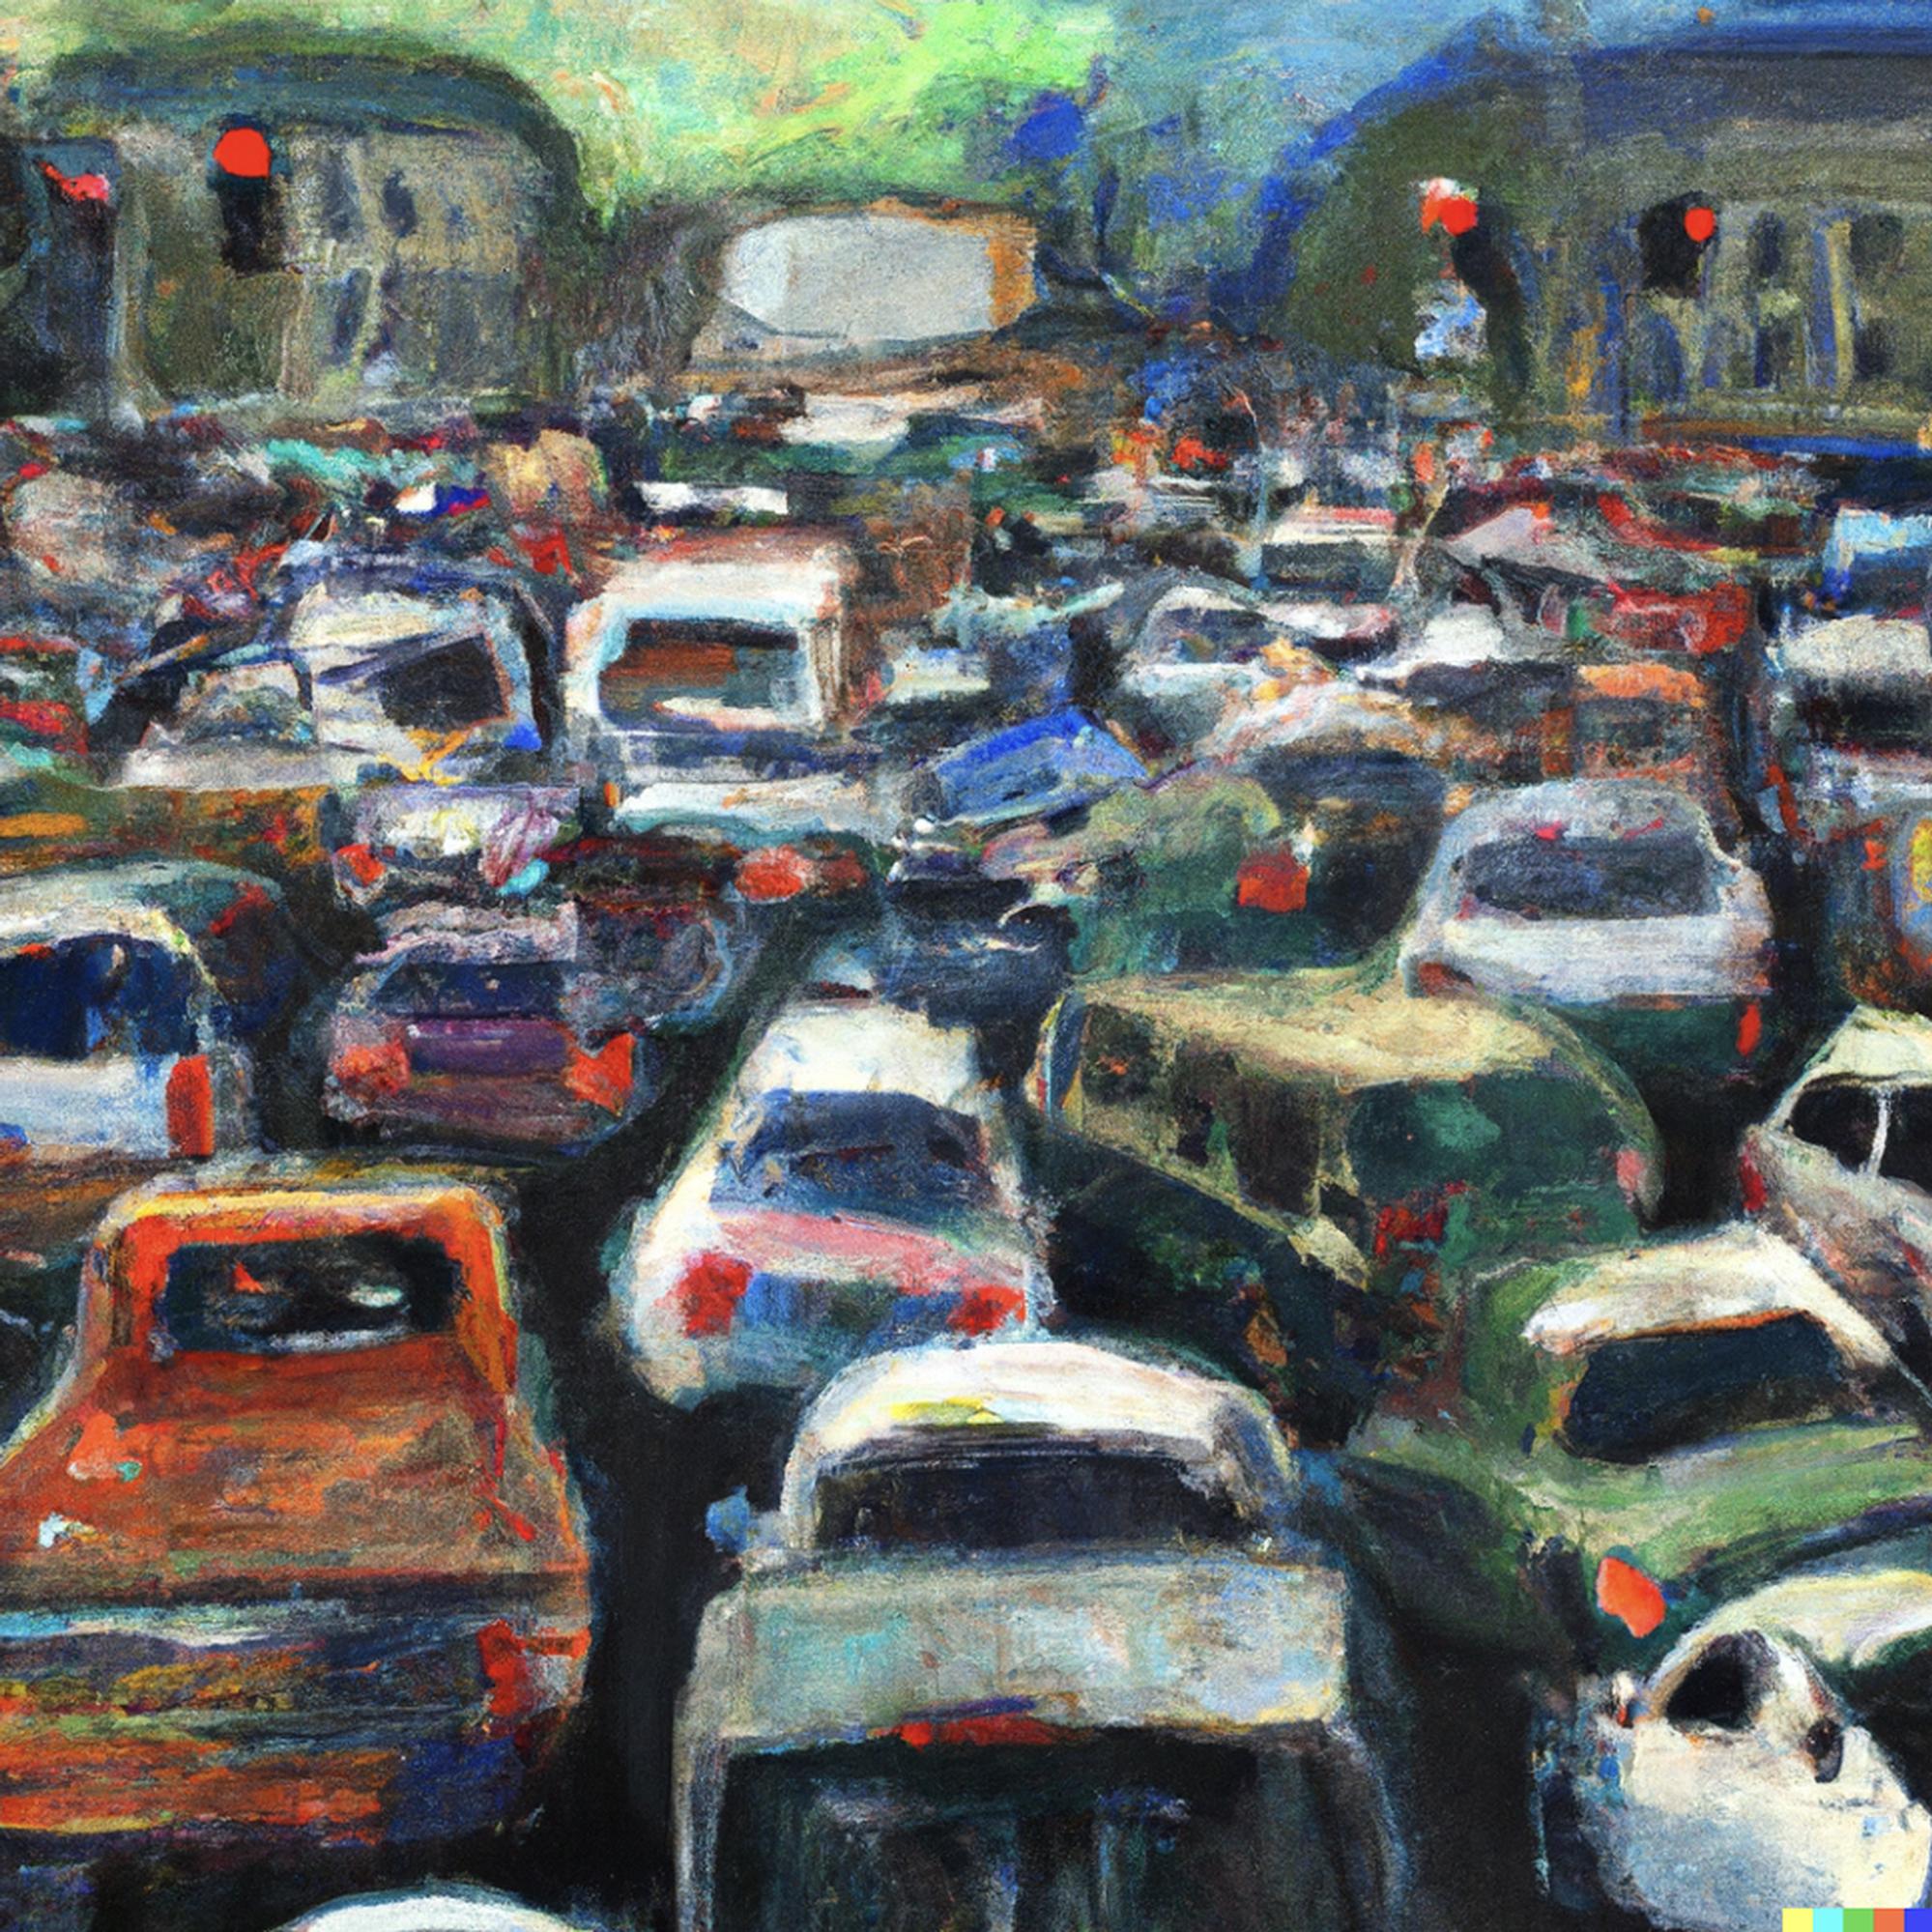 DALl-E generated image of “A traffic jam in the style of Renoir”